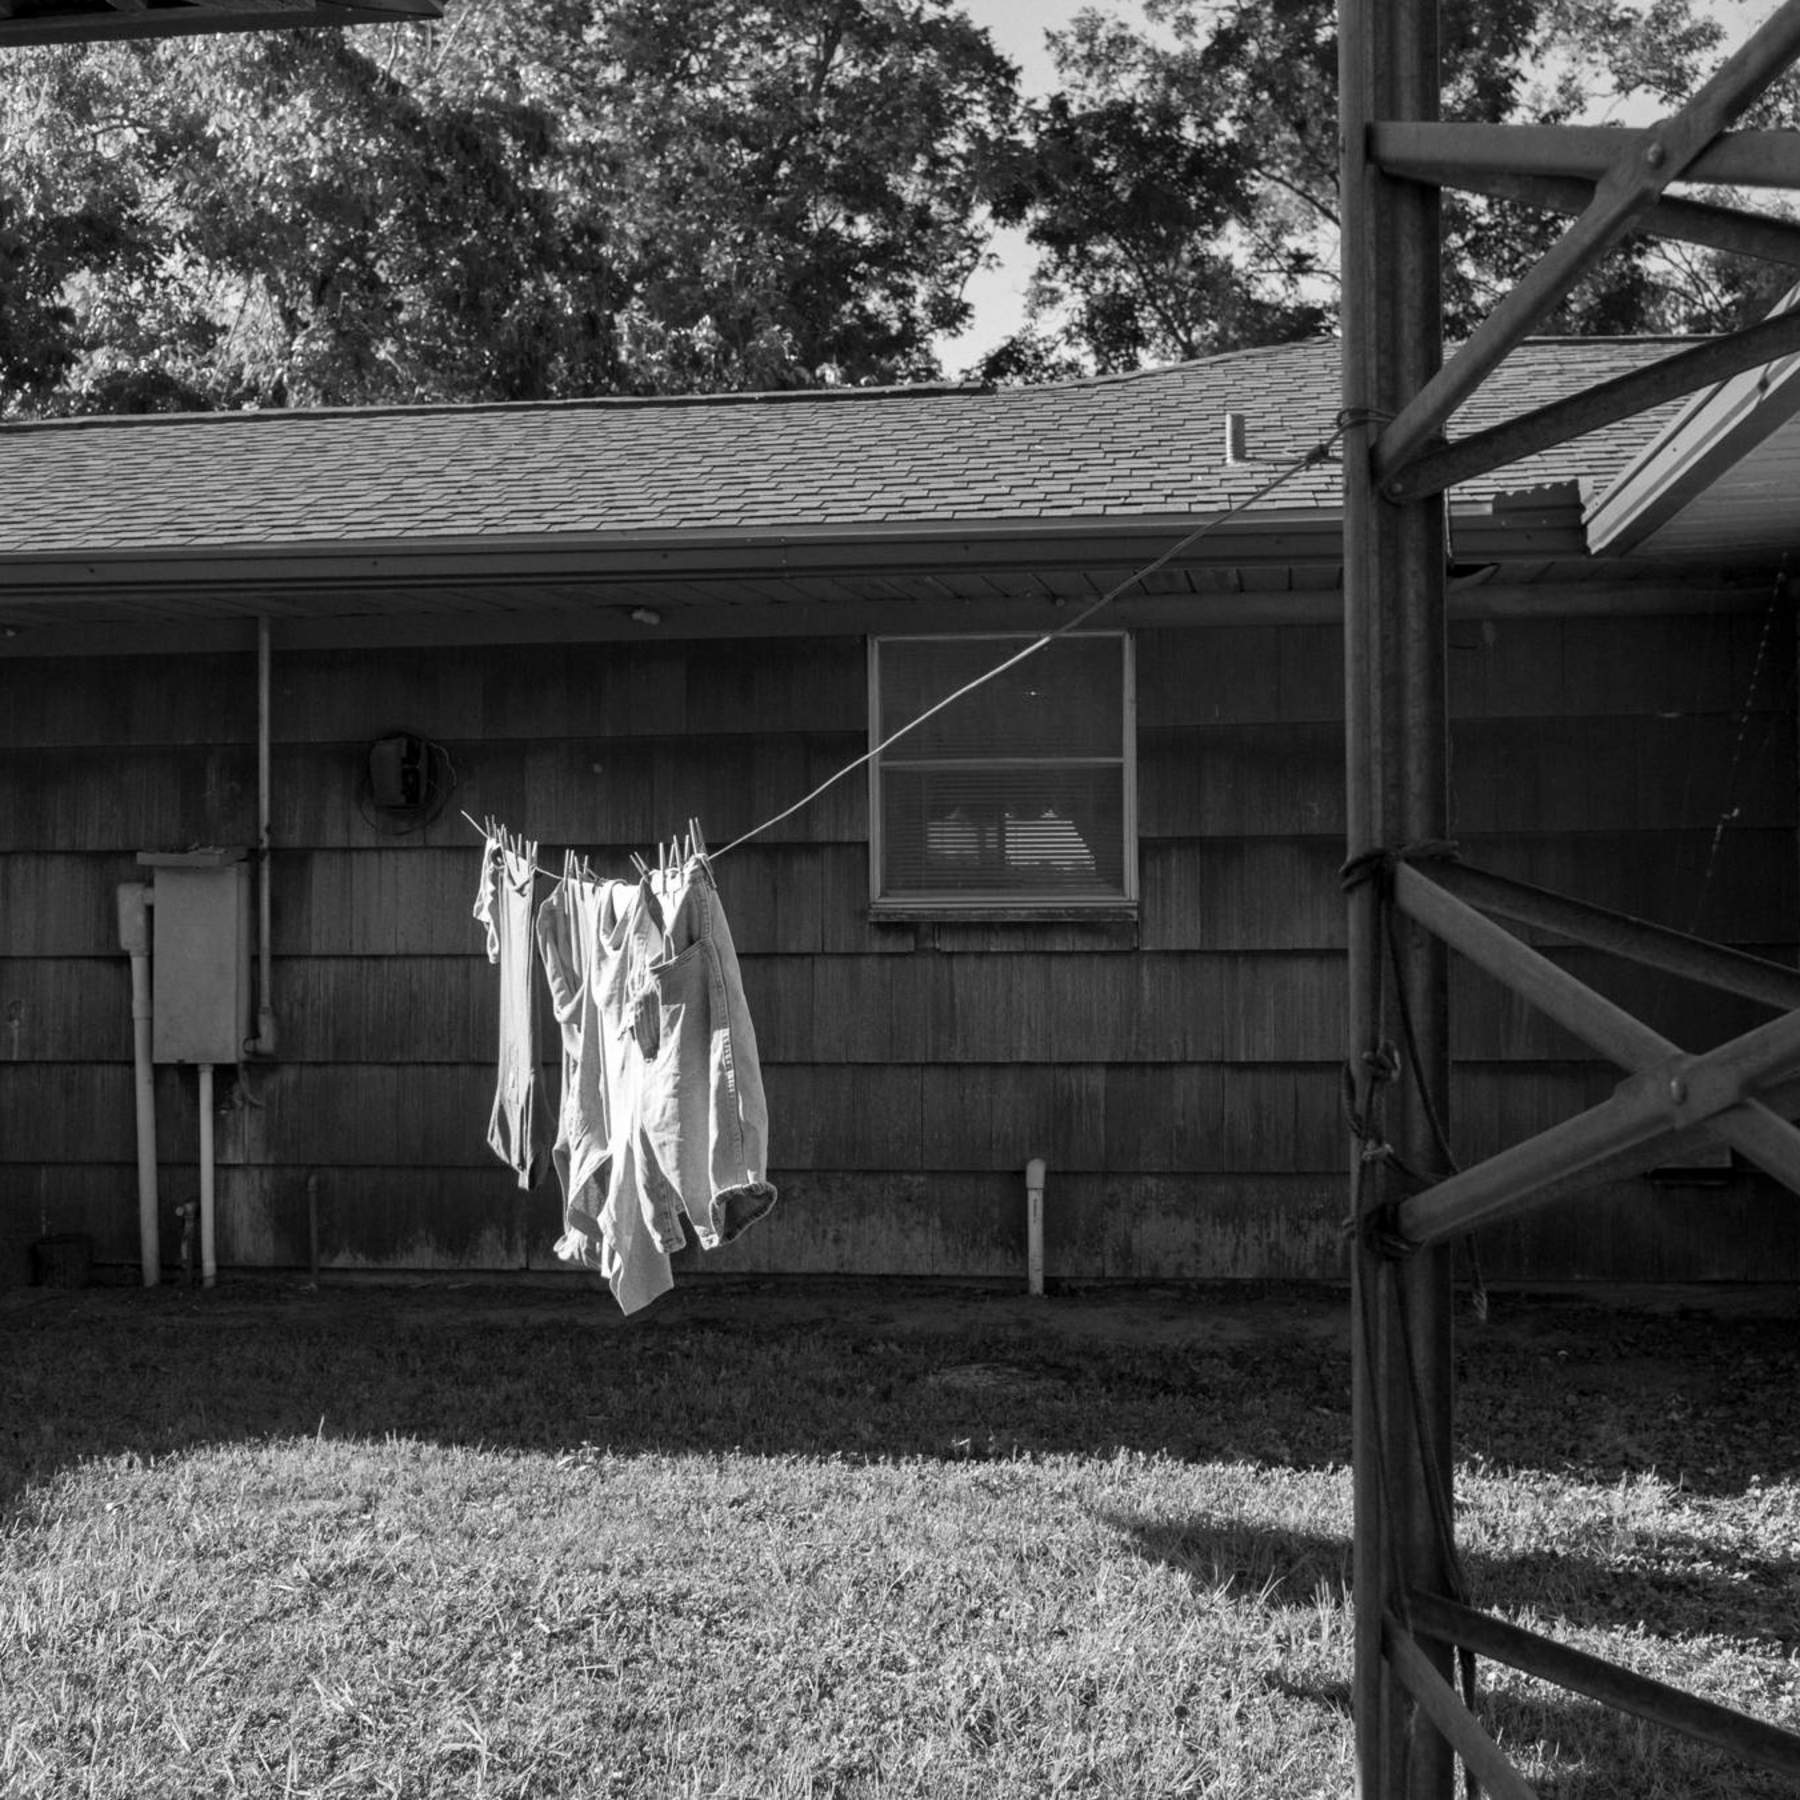 Student Work Black and White Photo of Laundry on a Clothesline